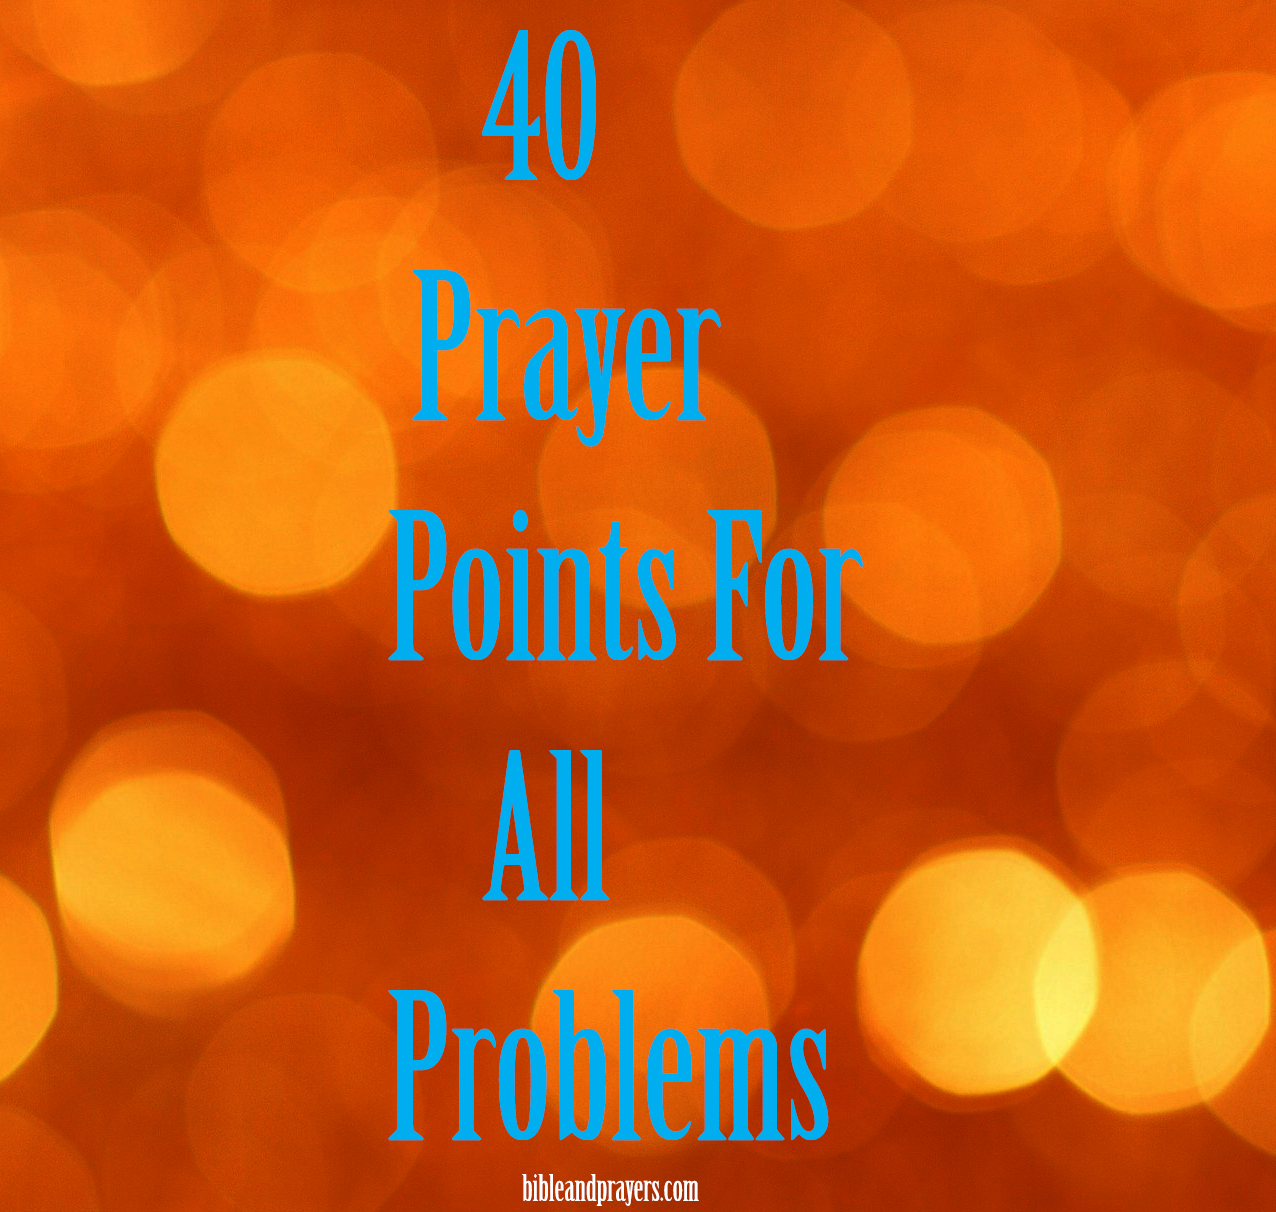 40 Prayer Points For All Problems